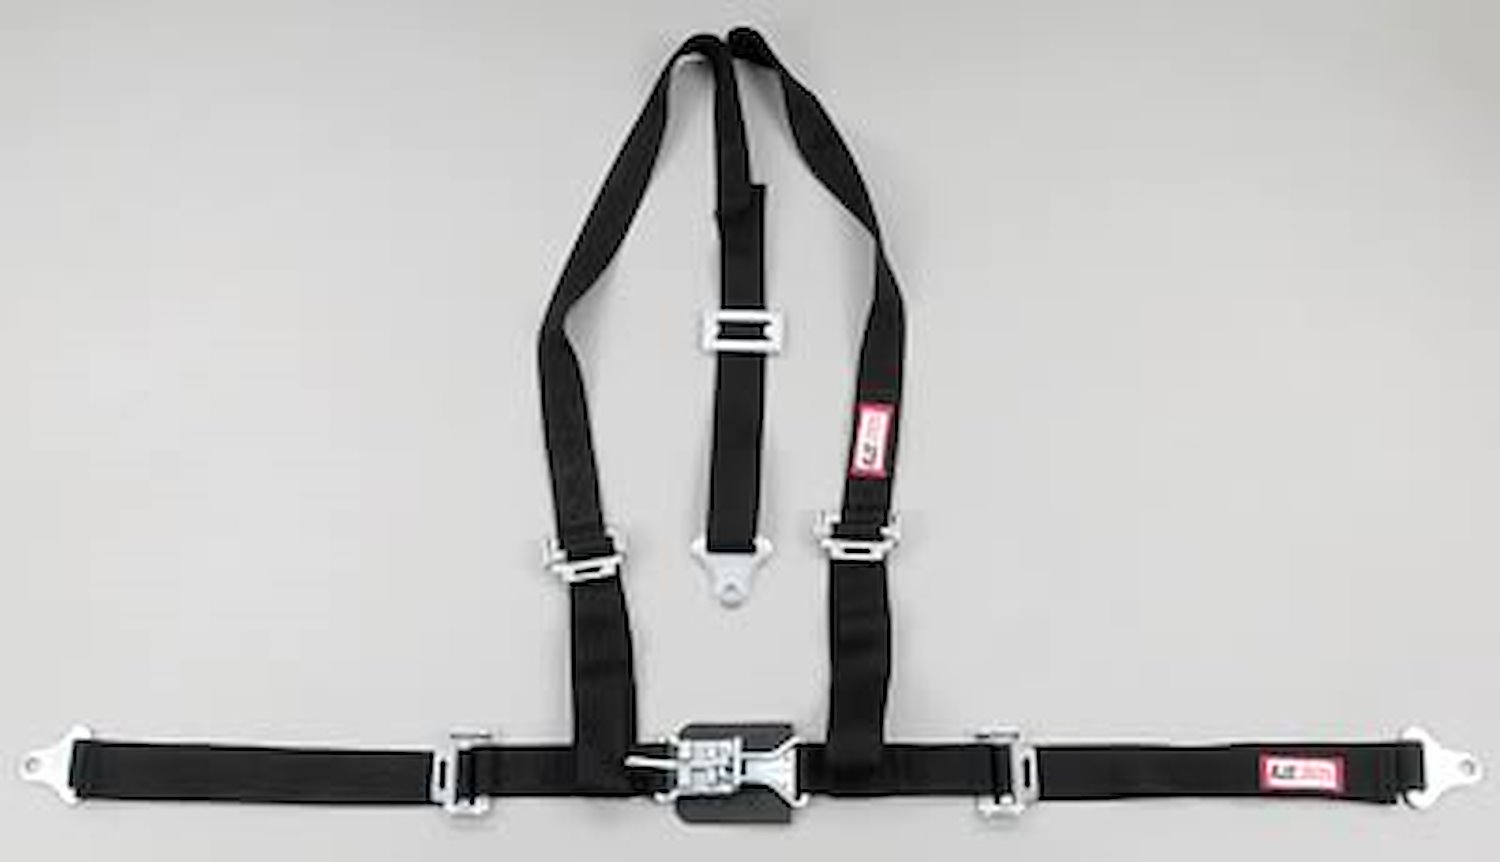 NON-SFI L&L HARNESS 2 PULL DOWN Lap Belt w/Adjuster SNAP 2 S.H. Individual FLOOR MOUNT w/STERNUM STRAP WRAP/SNAP GRAY